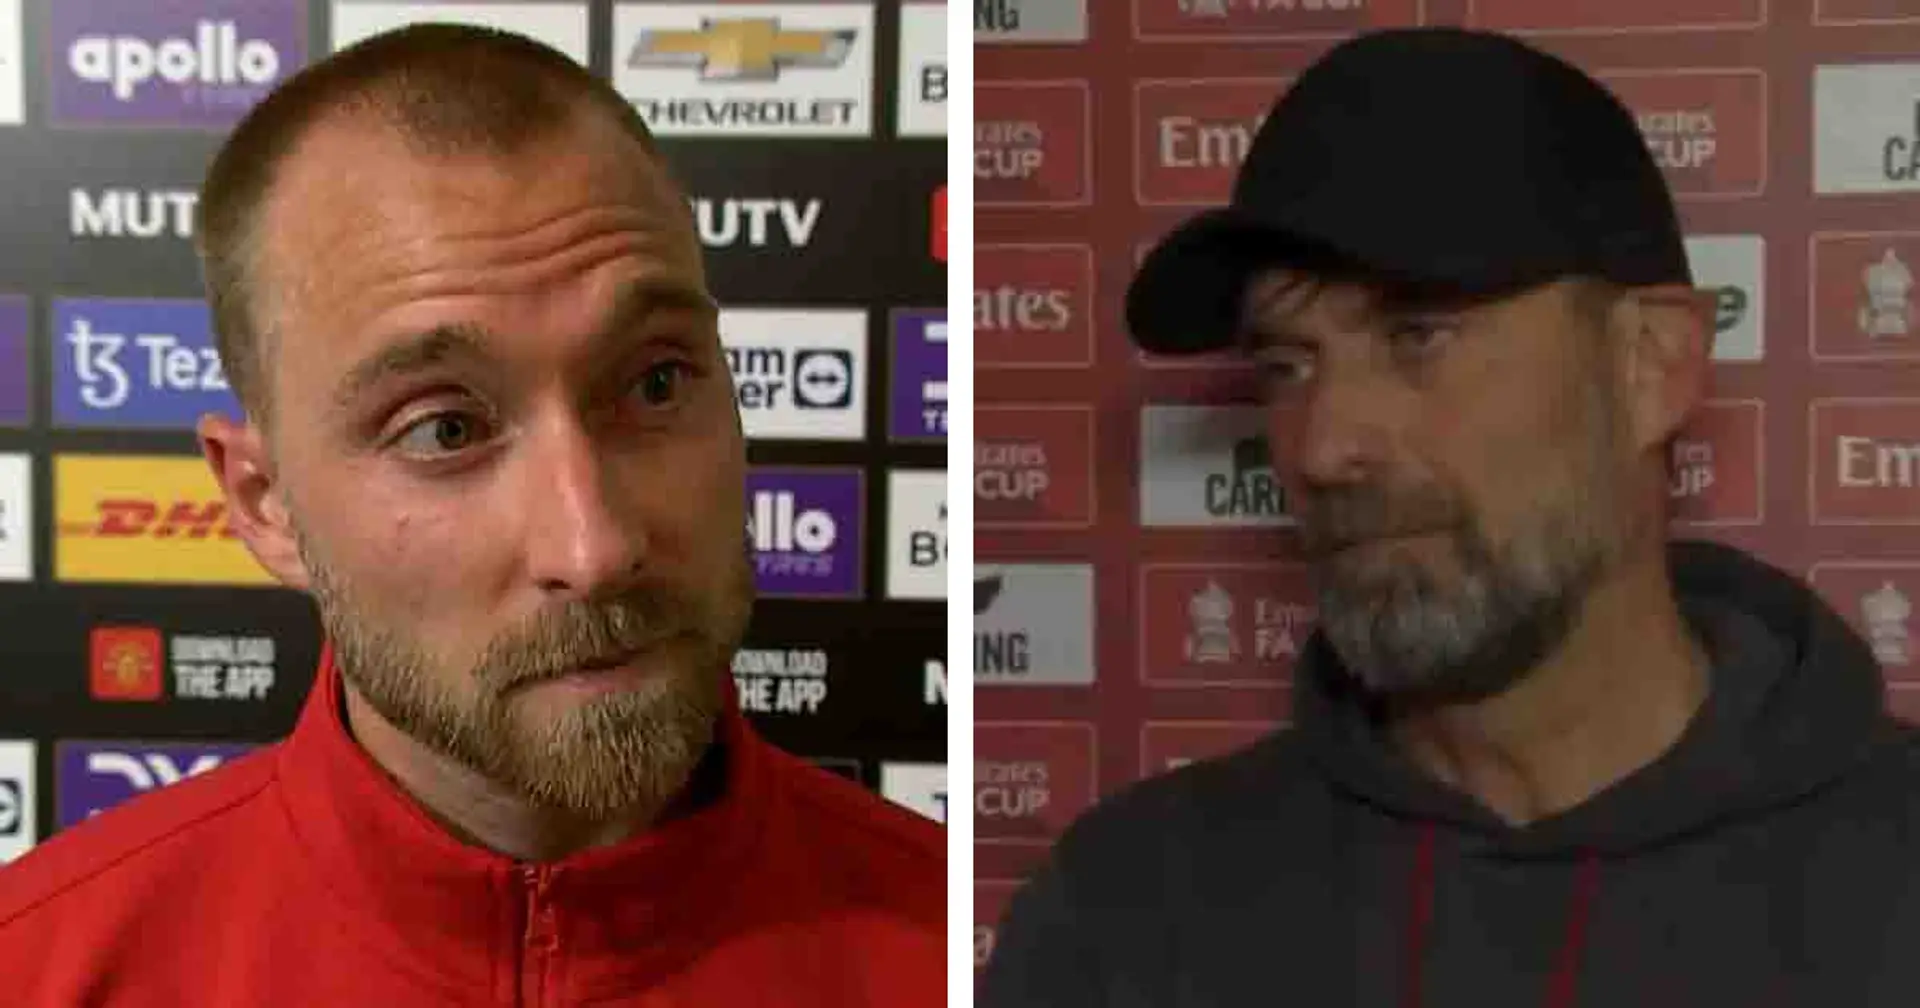 'I laughed at that': Eriksen reveals his reactions to Klopp belitting reporter after FA Cup loss